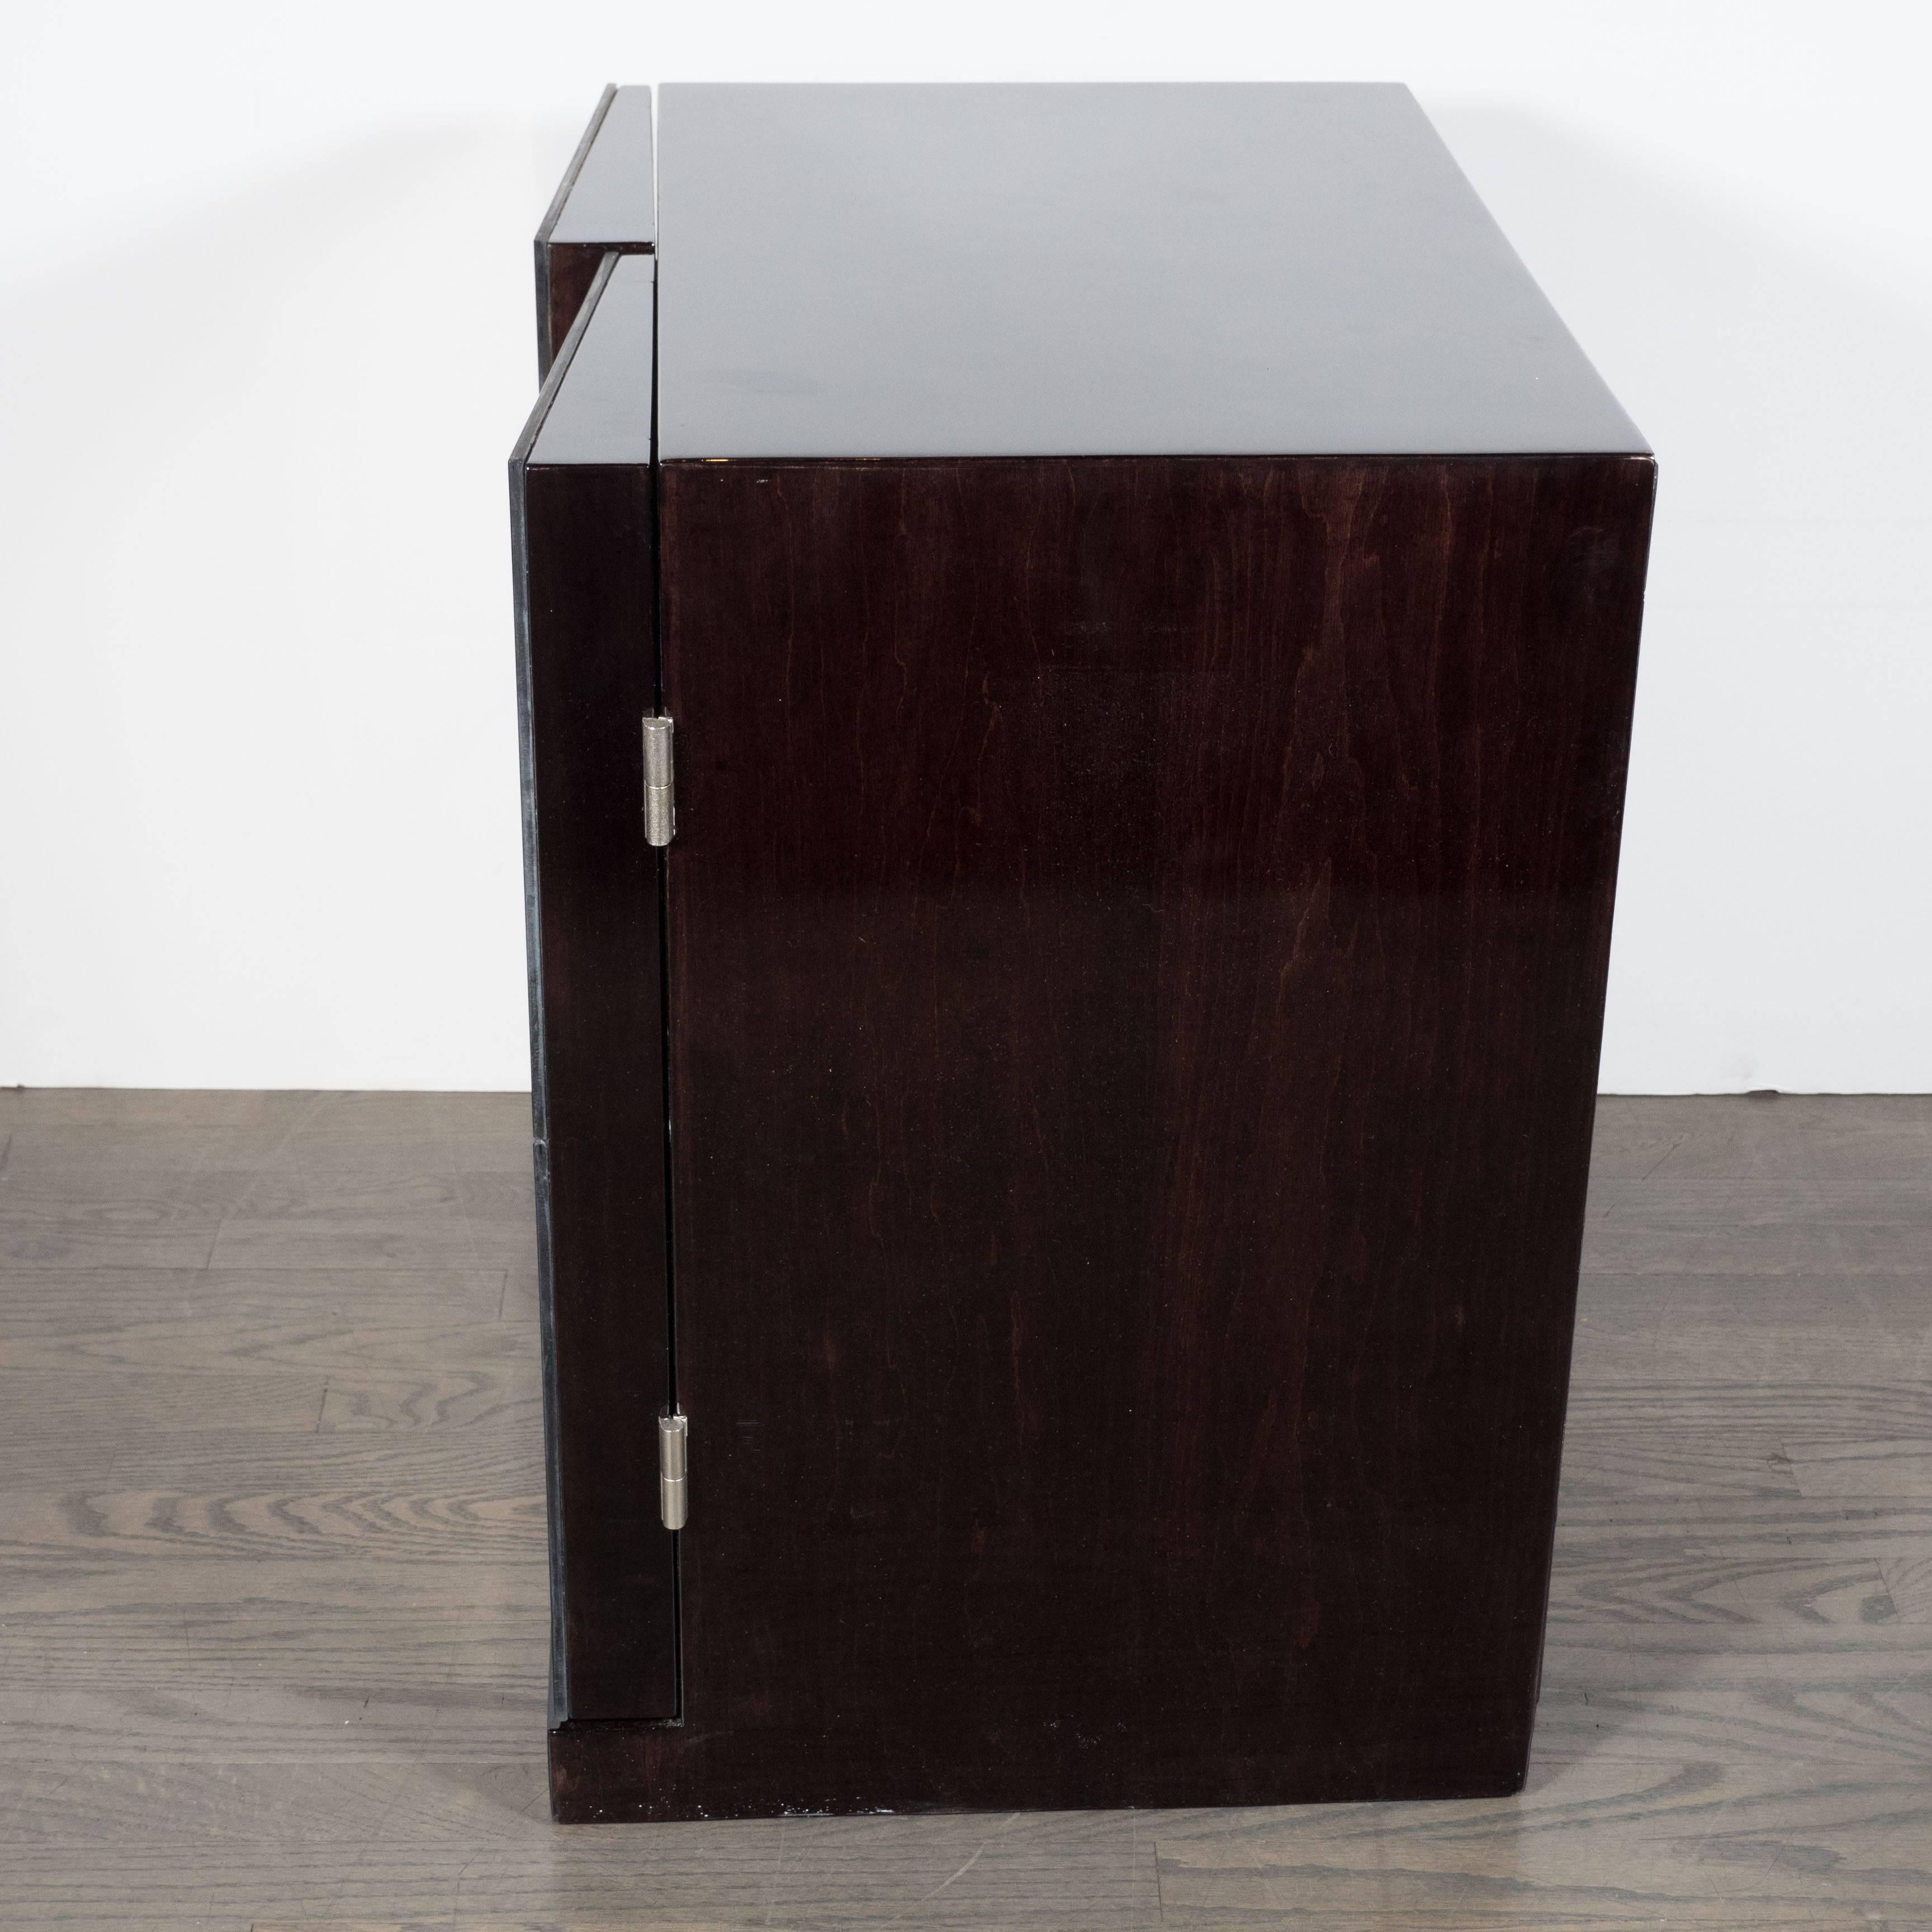 American Pair of Mid-Century Nightstands with Angled Cubist Smoked Mirror Fronts Panels